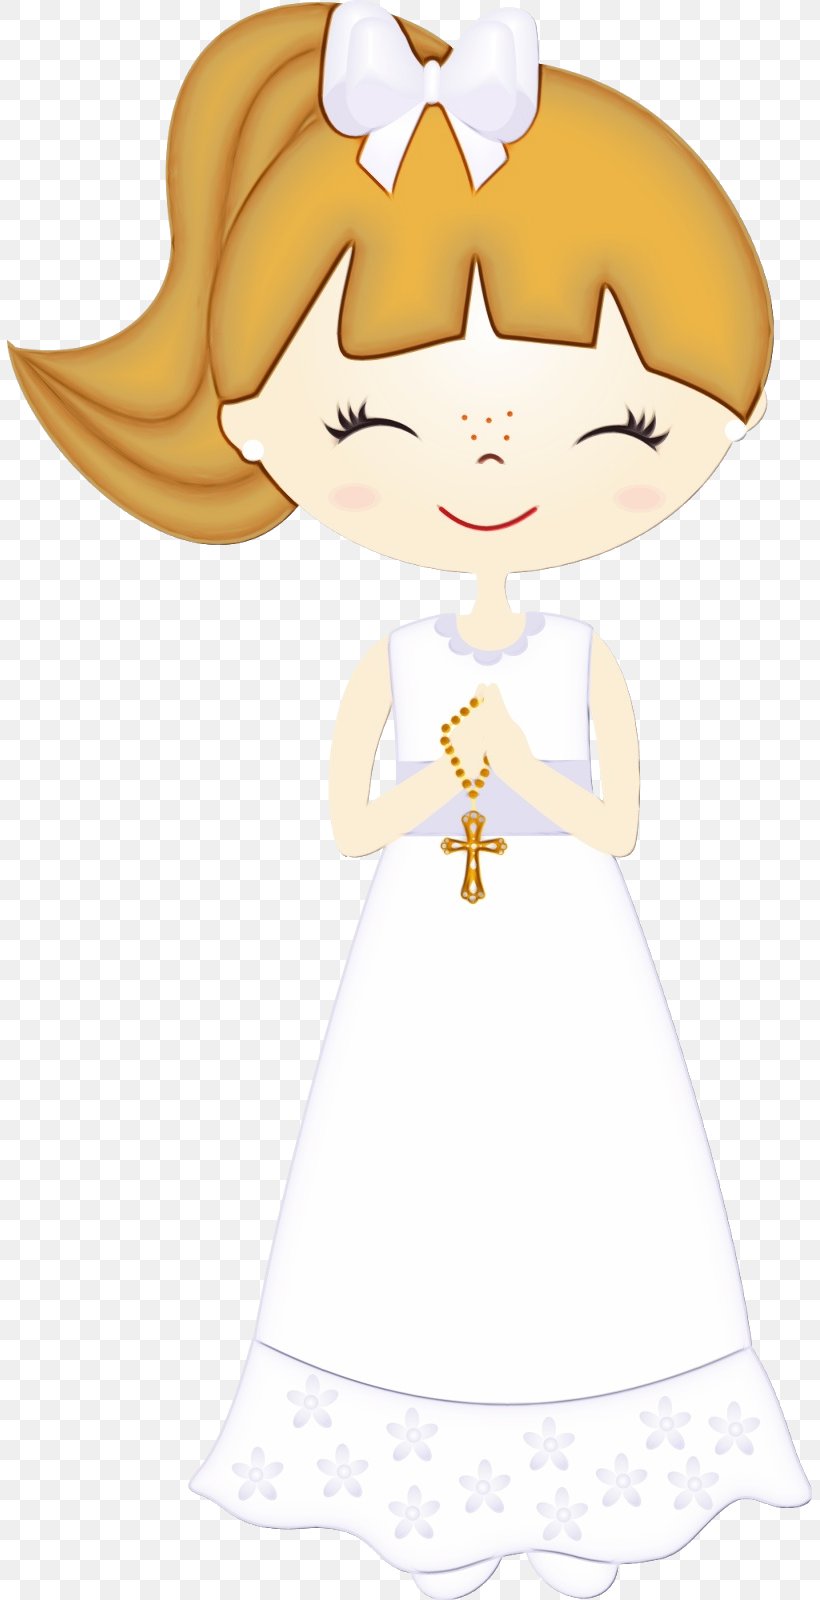 White Cartoon Clip Art Fictional Character Style, PNG, 805x1600px ...